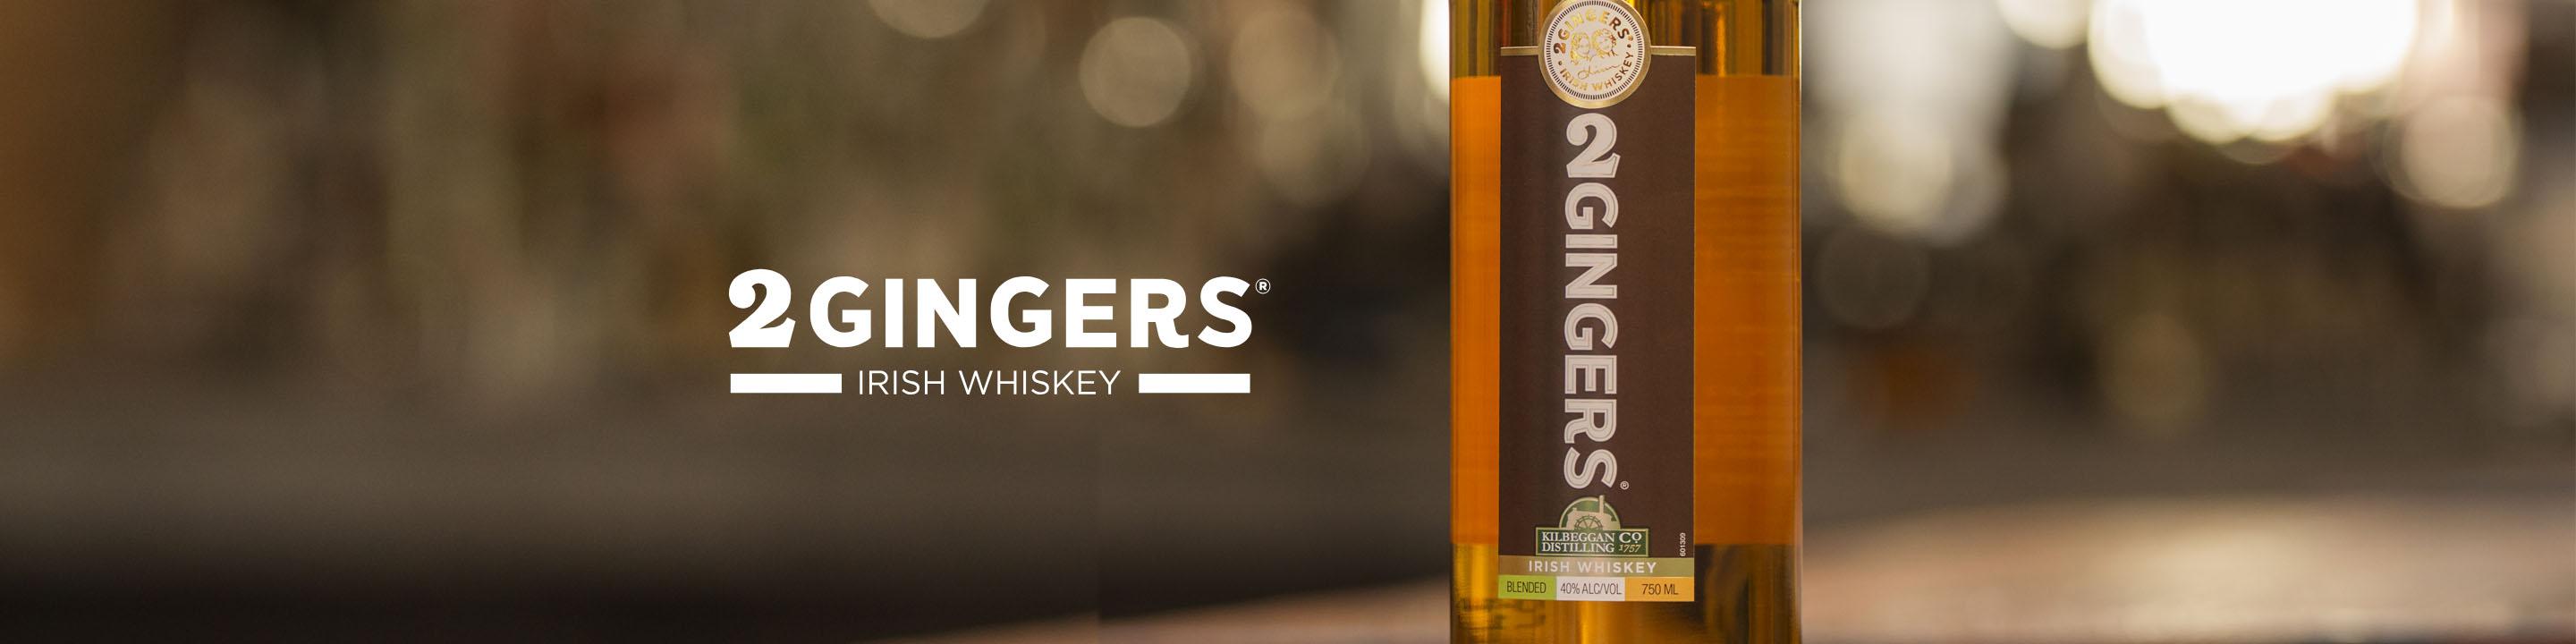 Smooth and slightly sweet to start, followed with a tingle of honey and citrus notes. 2 GINGERS® is a blended Irish whiskey that is distilled twice and aged 4 years in the mild climate of Ireland at the Kilbeggan Distillery, allowing its flavor to live well on its own or as a good base in cocktails.

Buy 2 Gingers online now from nearby liquor stores via Minibar Delivery. 